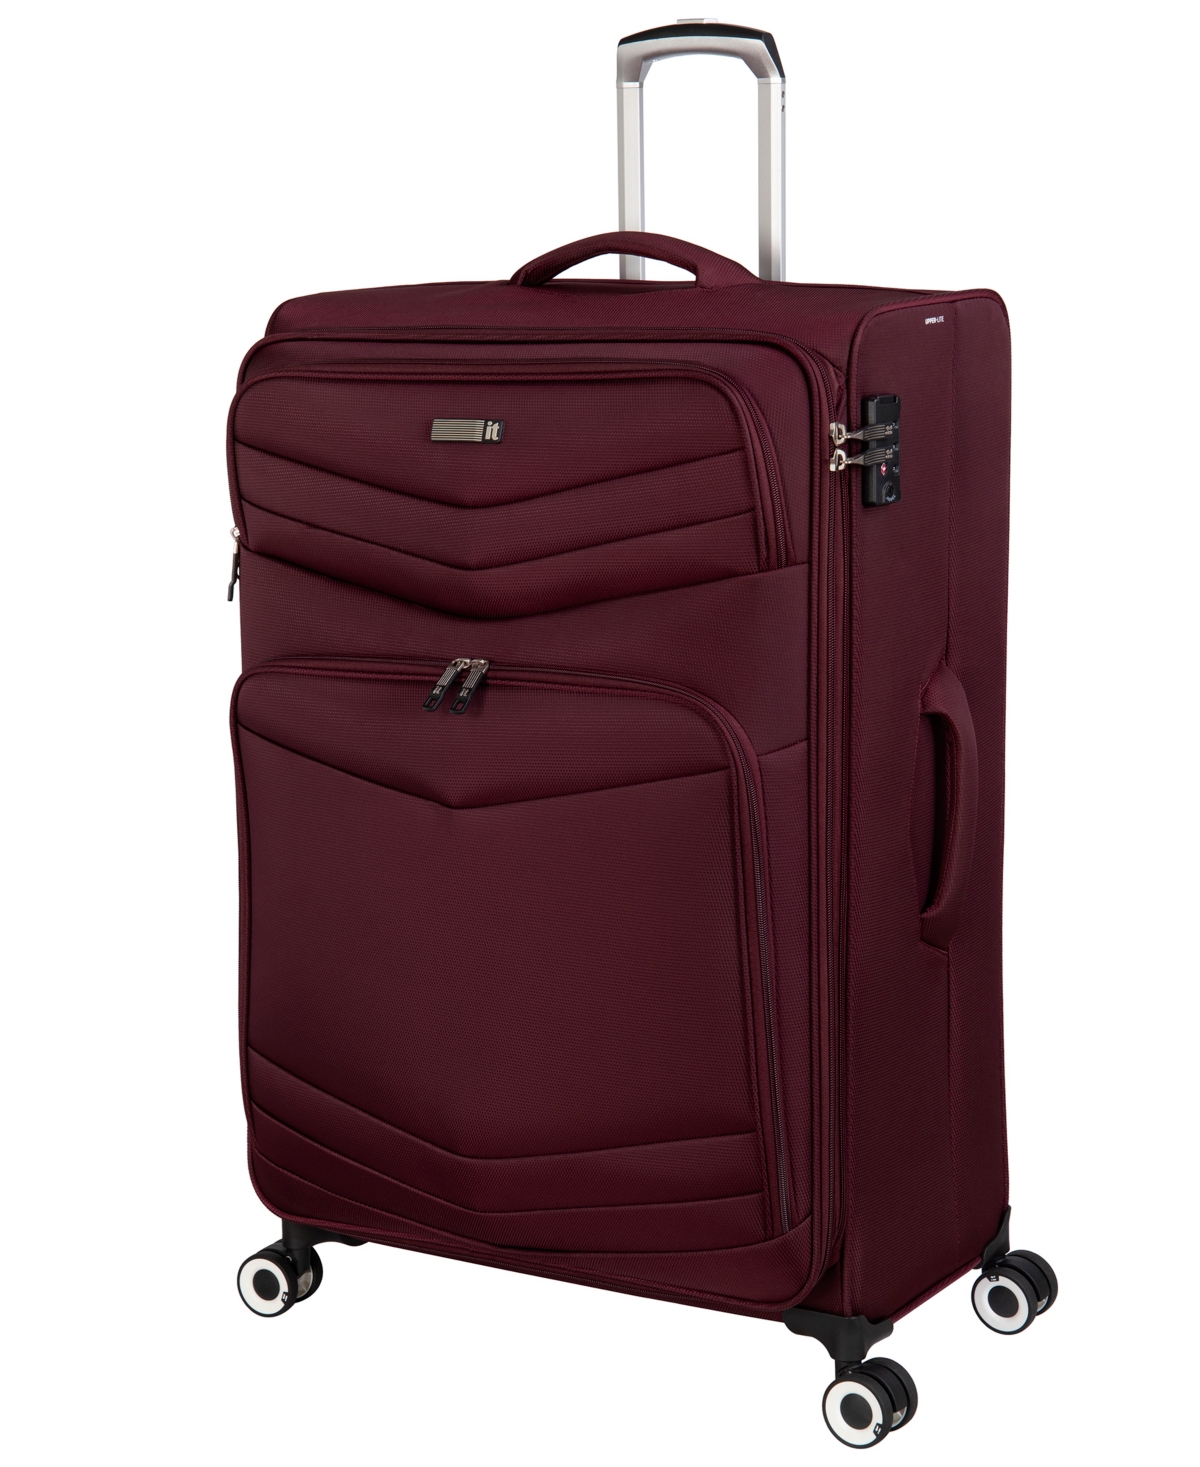 Intrepid 20" 8-Wheel Expandable Carry-On Luggage Case - Dark Red